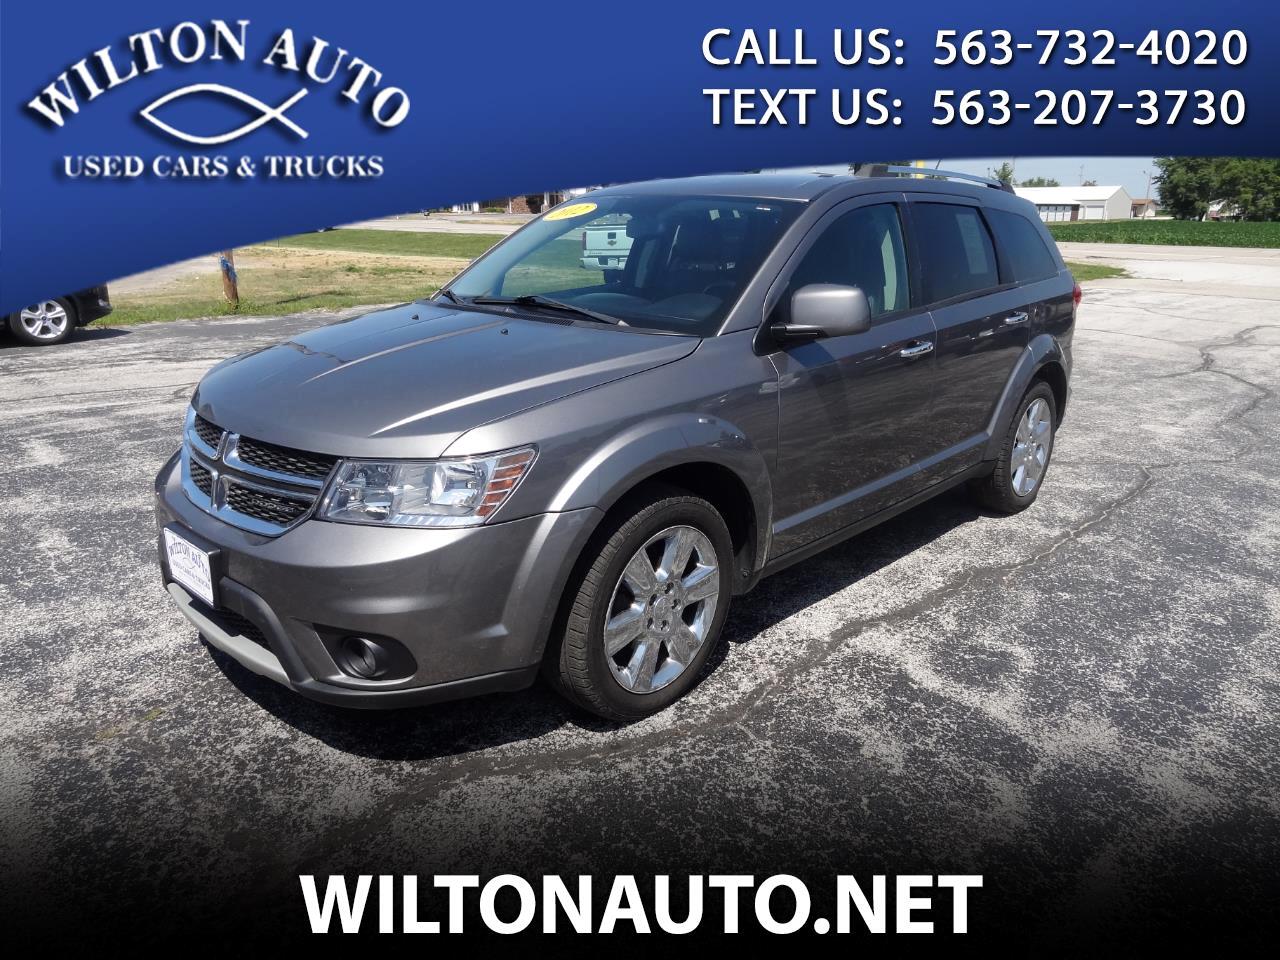 Used 2012 Dodge Journey Fwd 4dr Crew For Sale In Wilton Ia